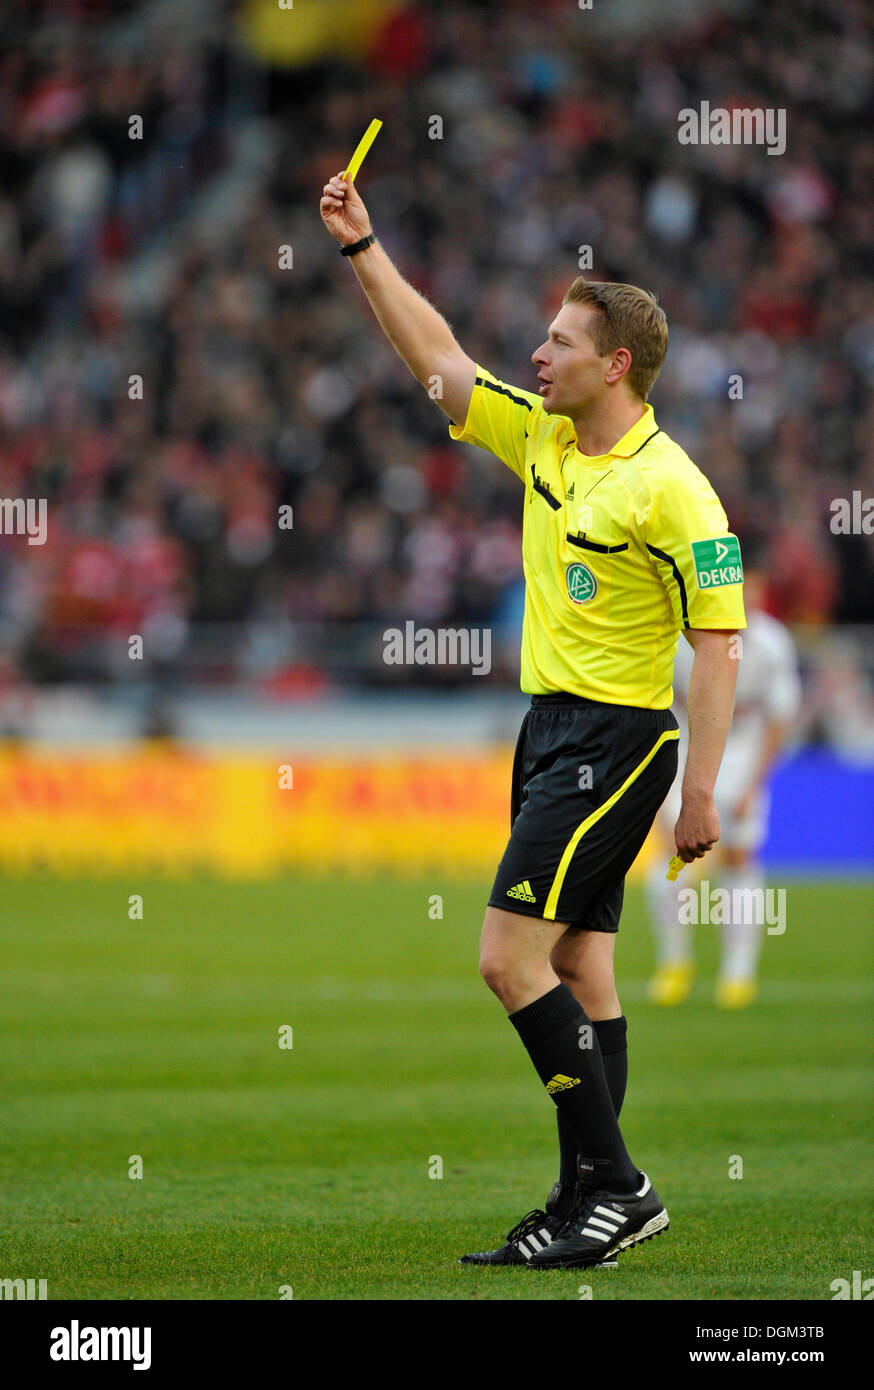 Referee Tobias WELZ giving the yellow card, warning Stock Photo